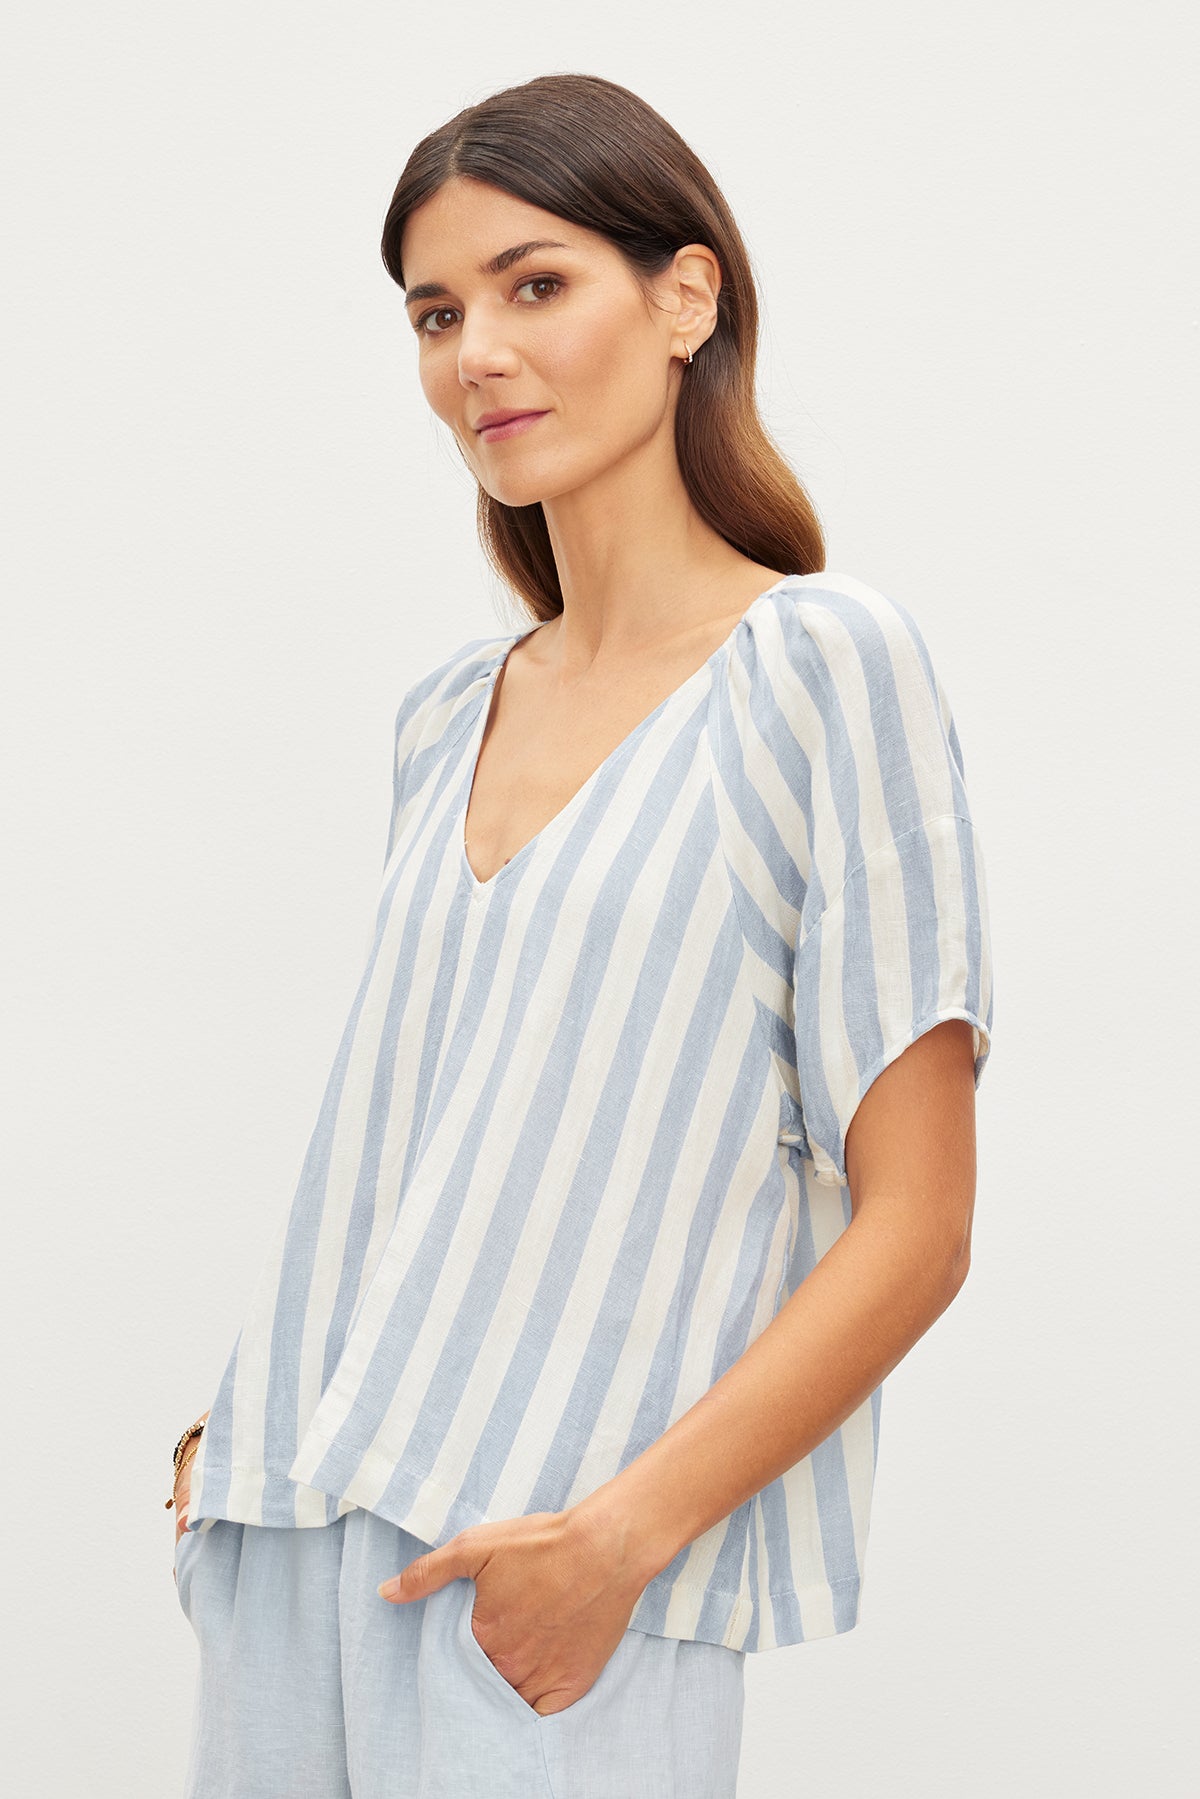   The model is wearing a relaxed fit blue and white striped top, the KATY STRIPED LINEN TOP, with West Coast vibes from Velvet by Graham & Spencer. 